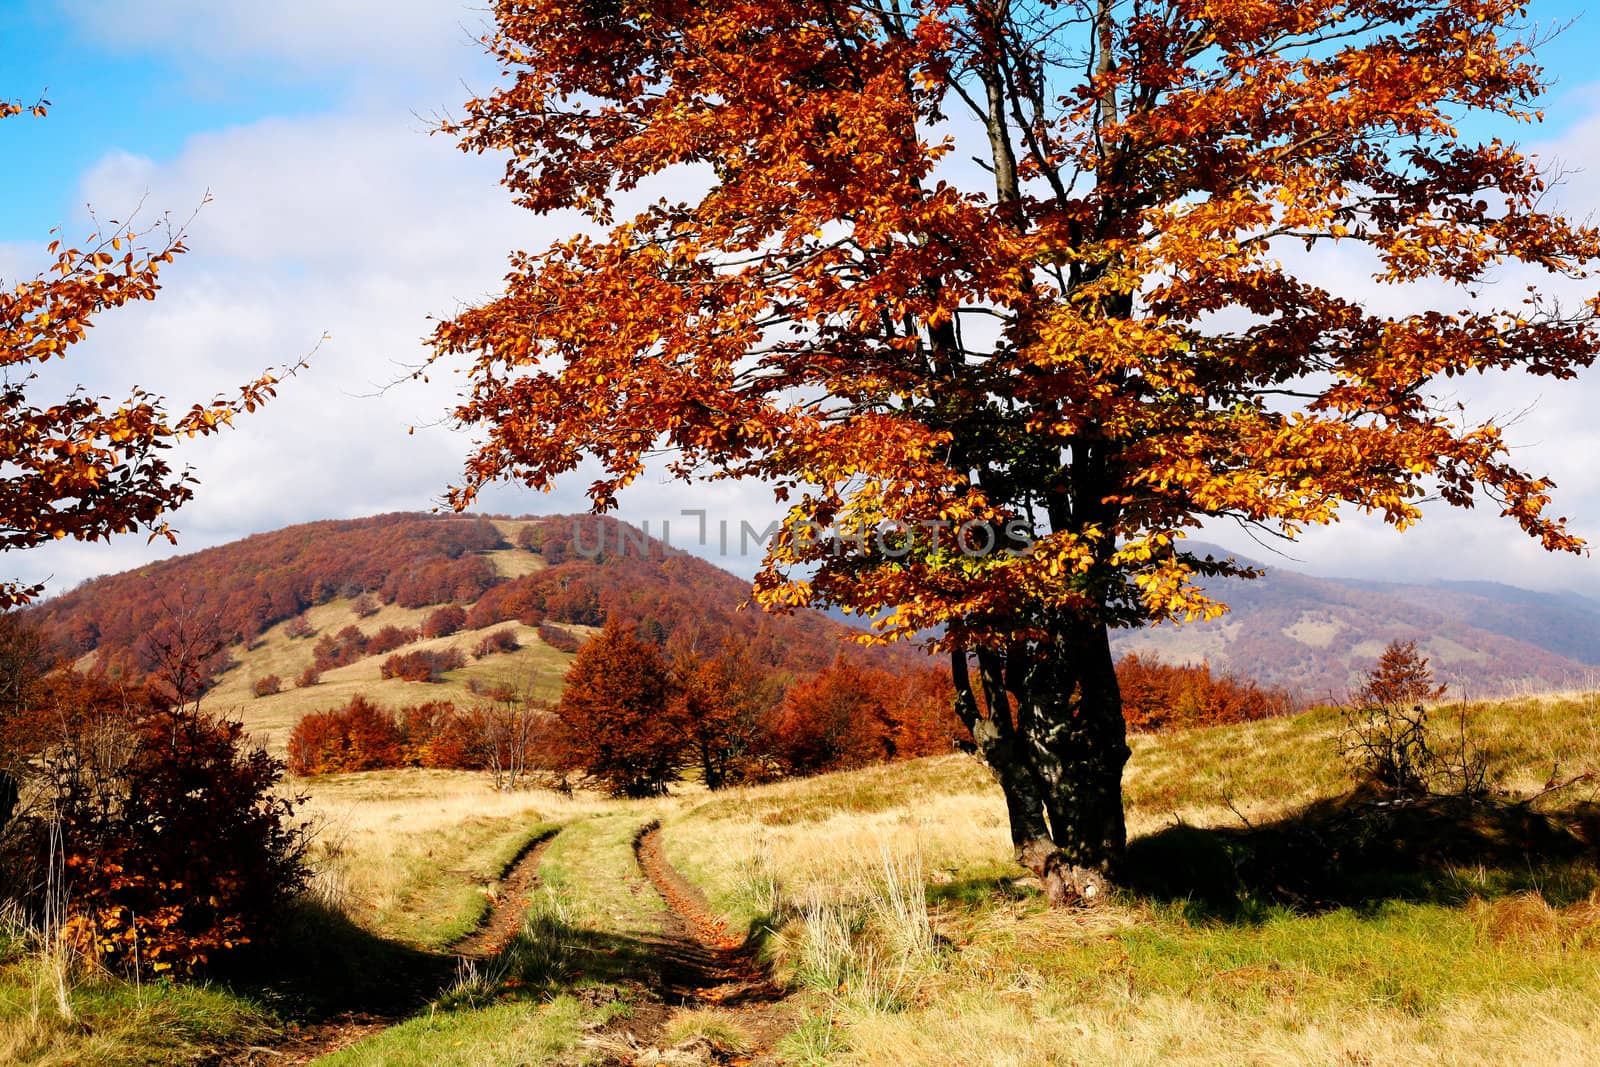 An image of autumn trees in the mountains